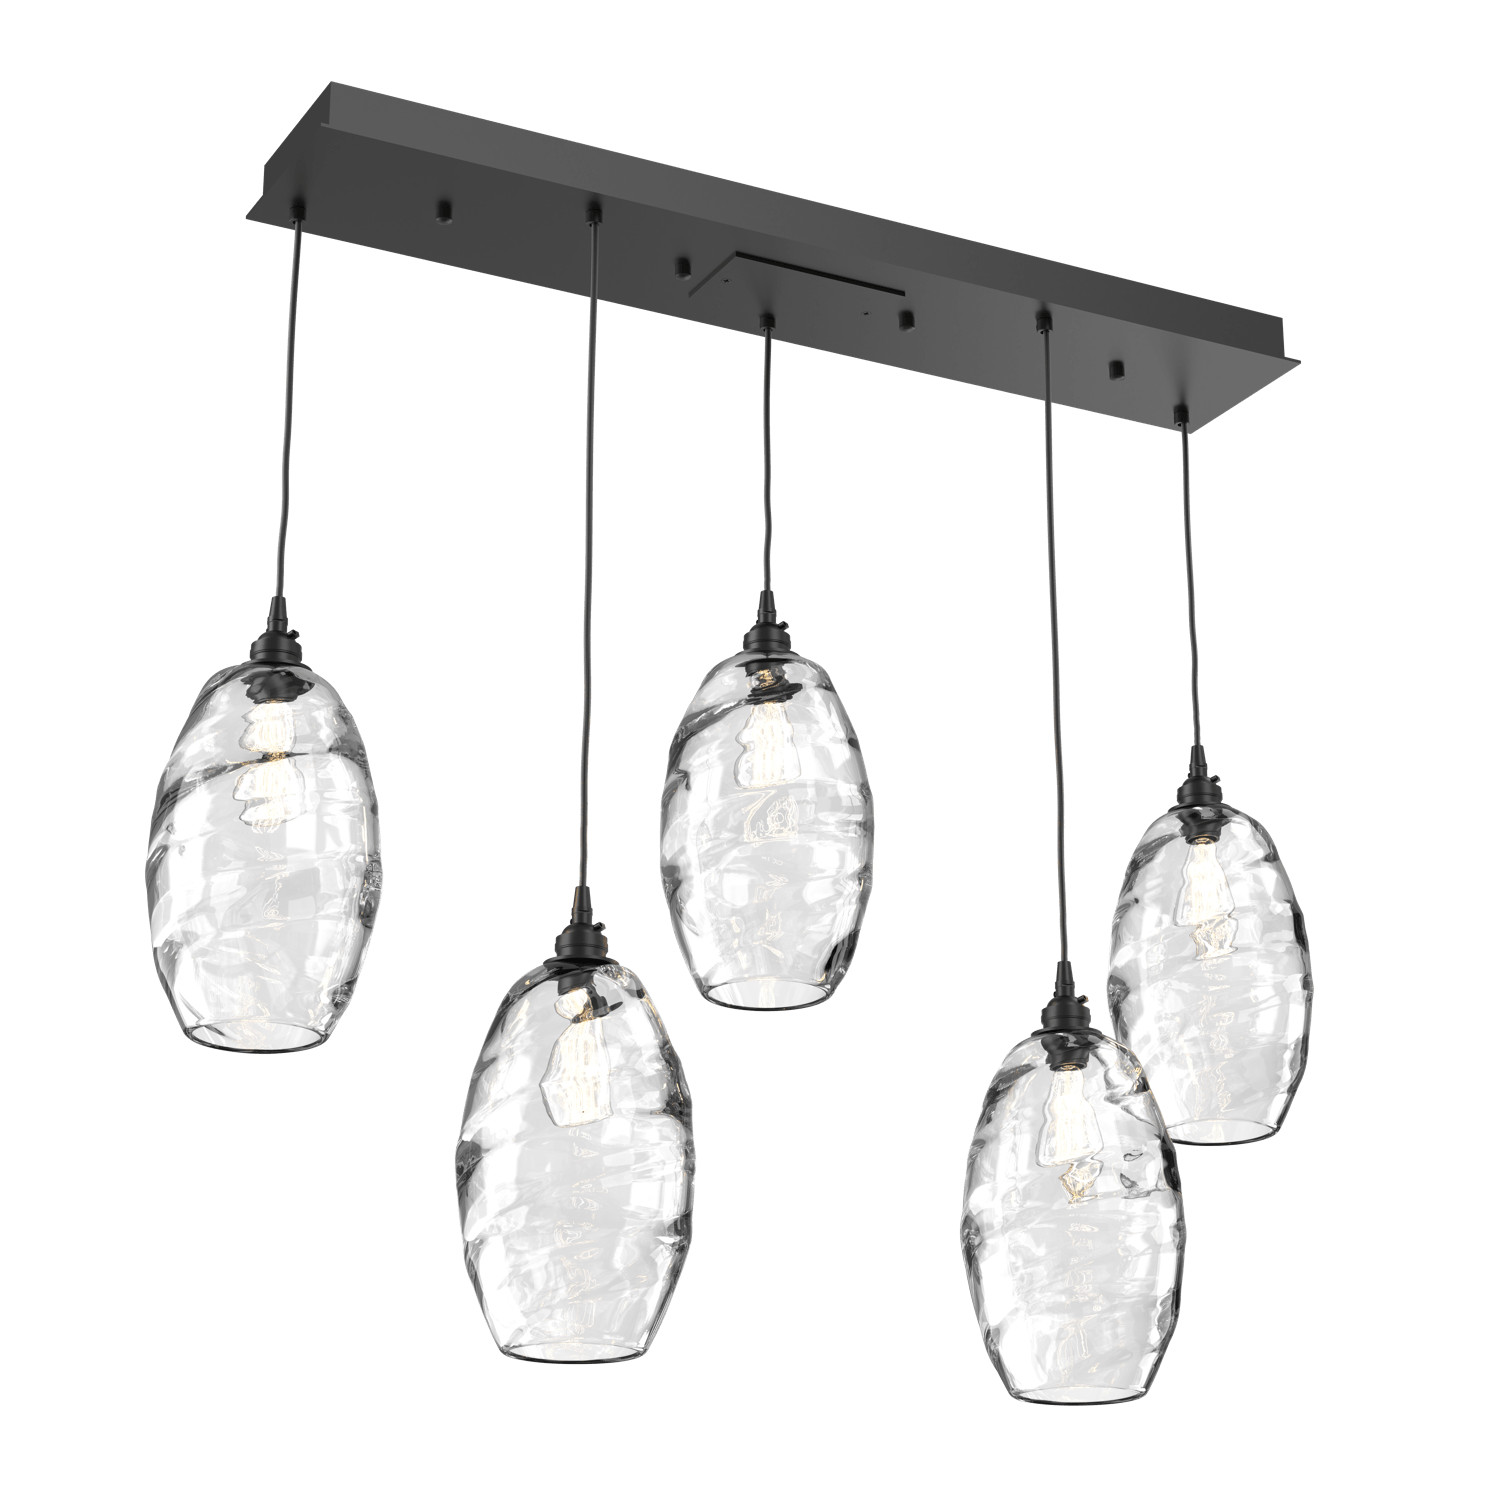 PLB0035-05-MB-OC-Hammerton-Studio-Optic-Blown-Glass-Elisse-5-light-linear-pendant-chandelier-with-matte-black-finish-and-optic-clear-blown-glass-shades-and-incandescent-lamping